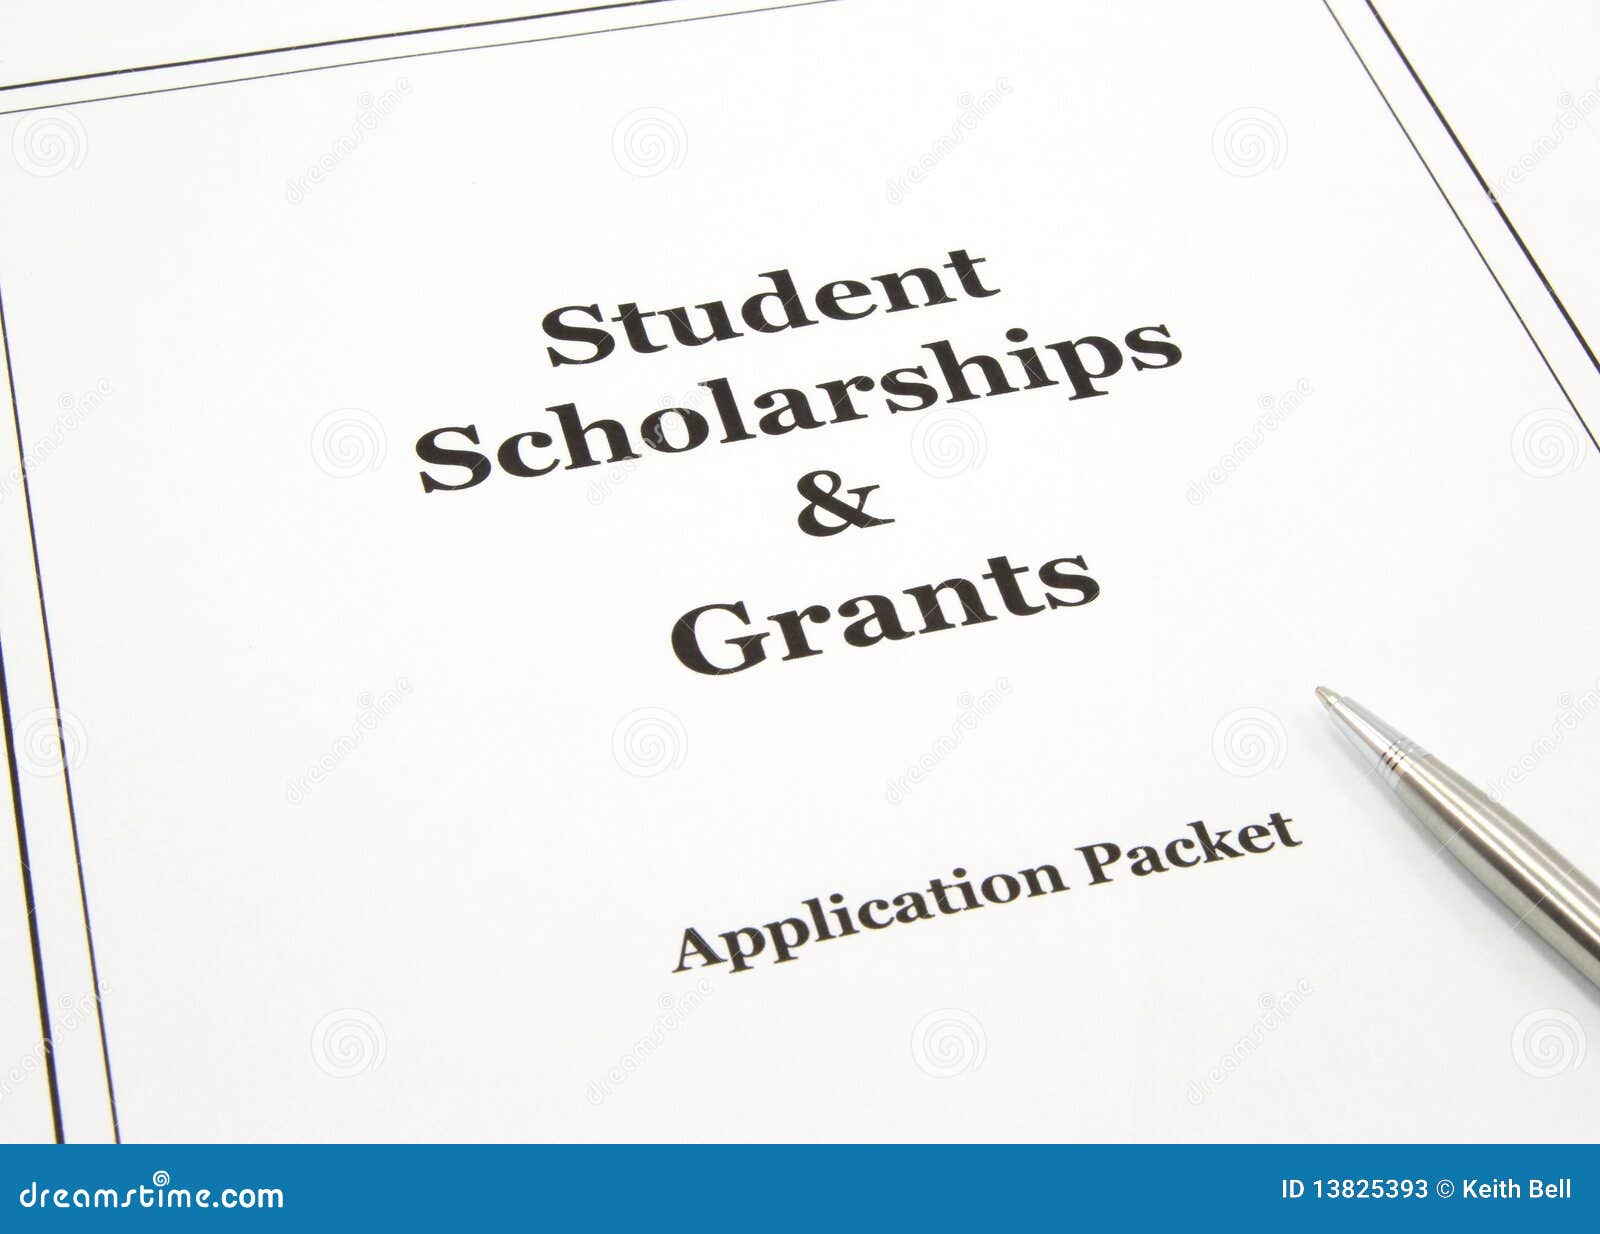 scholarship and grants application packet